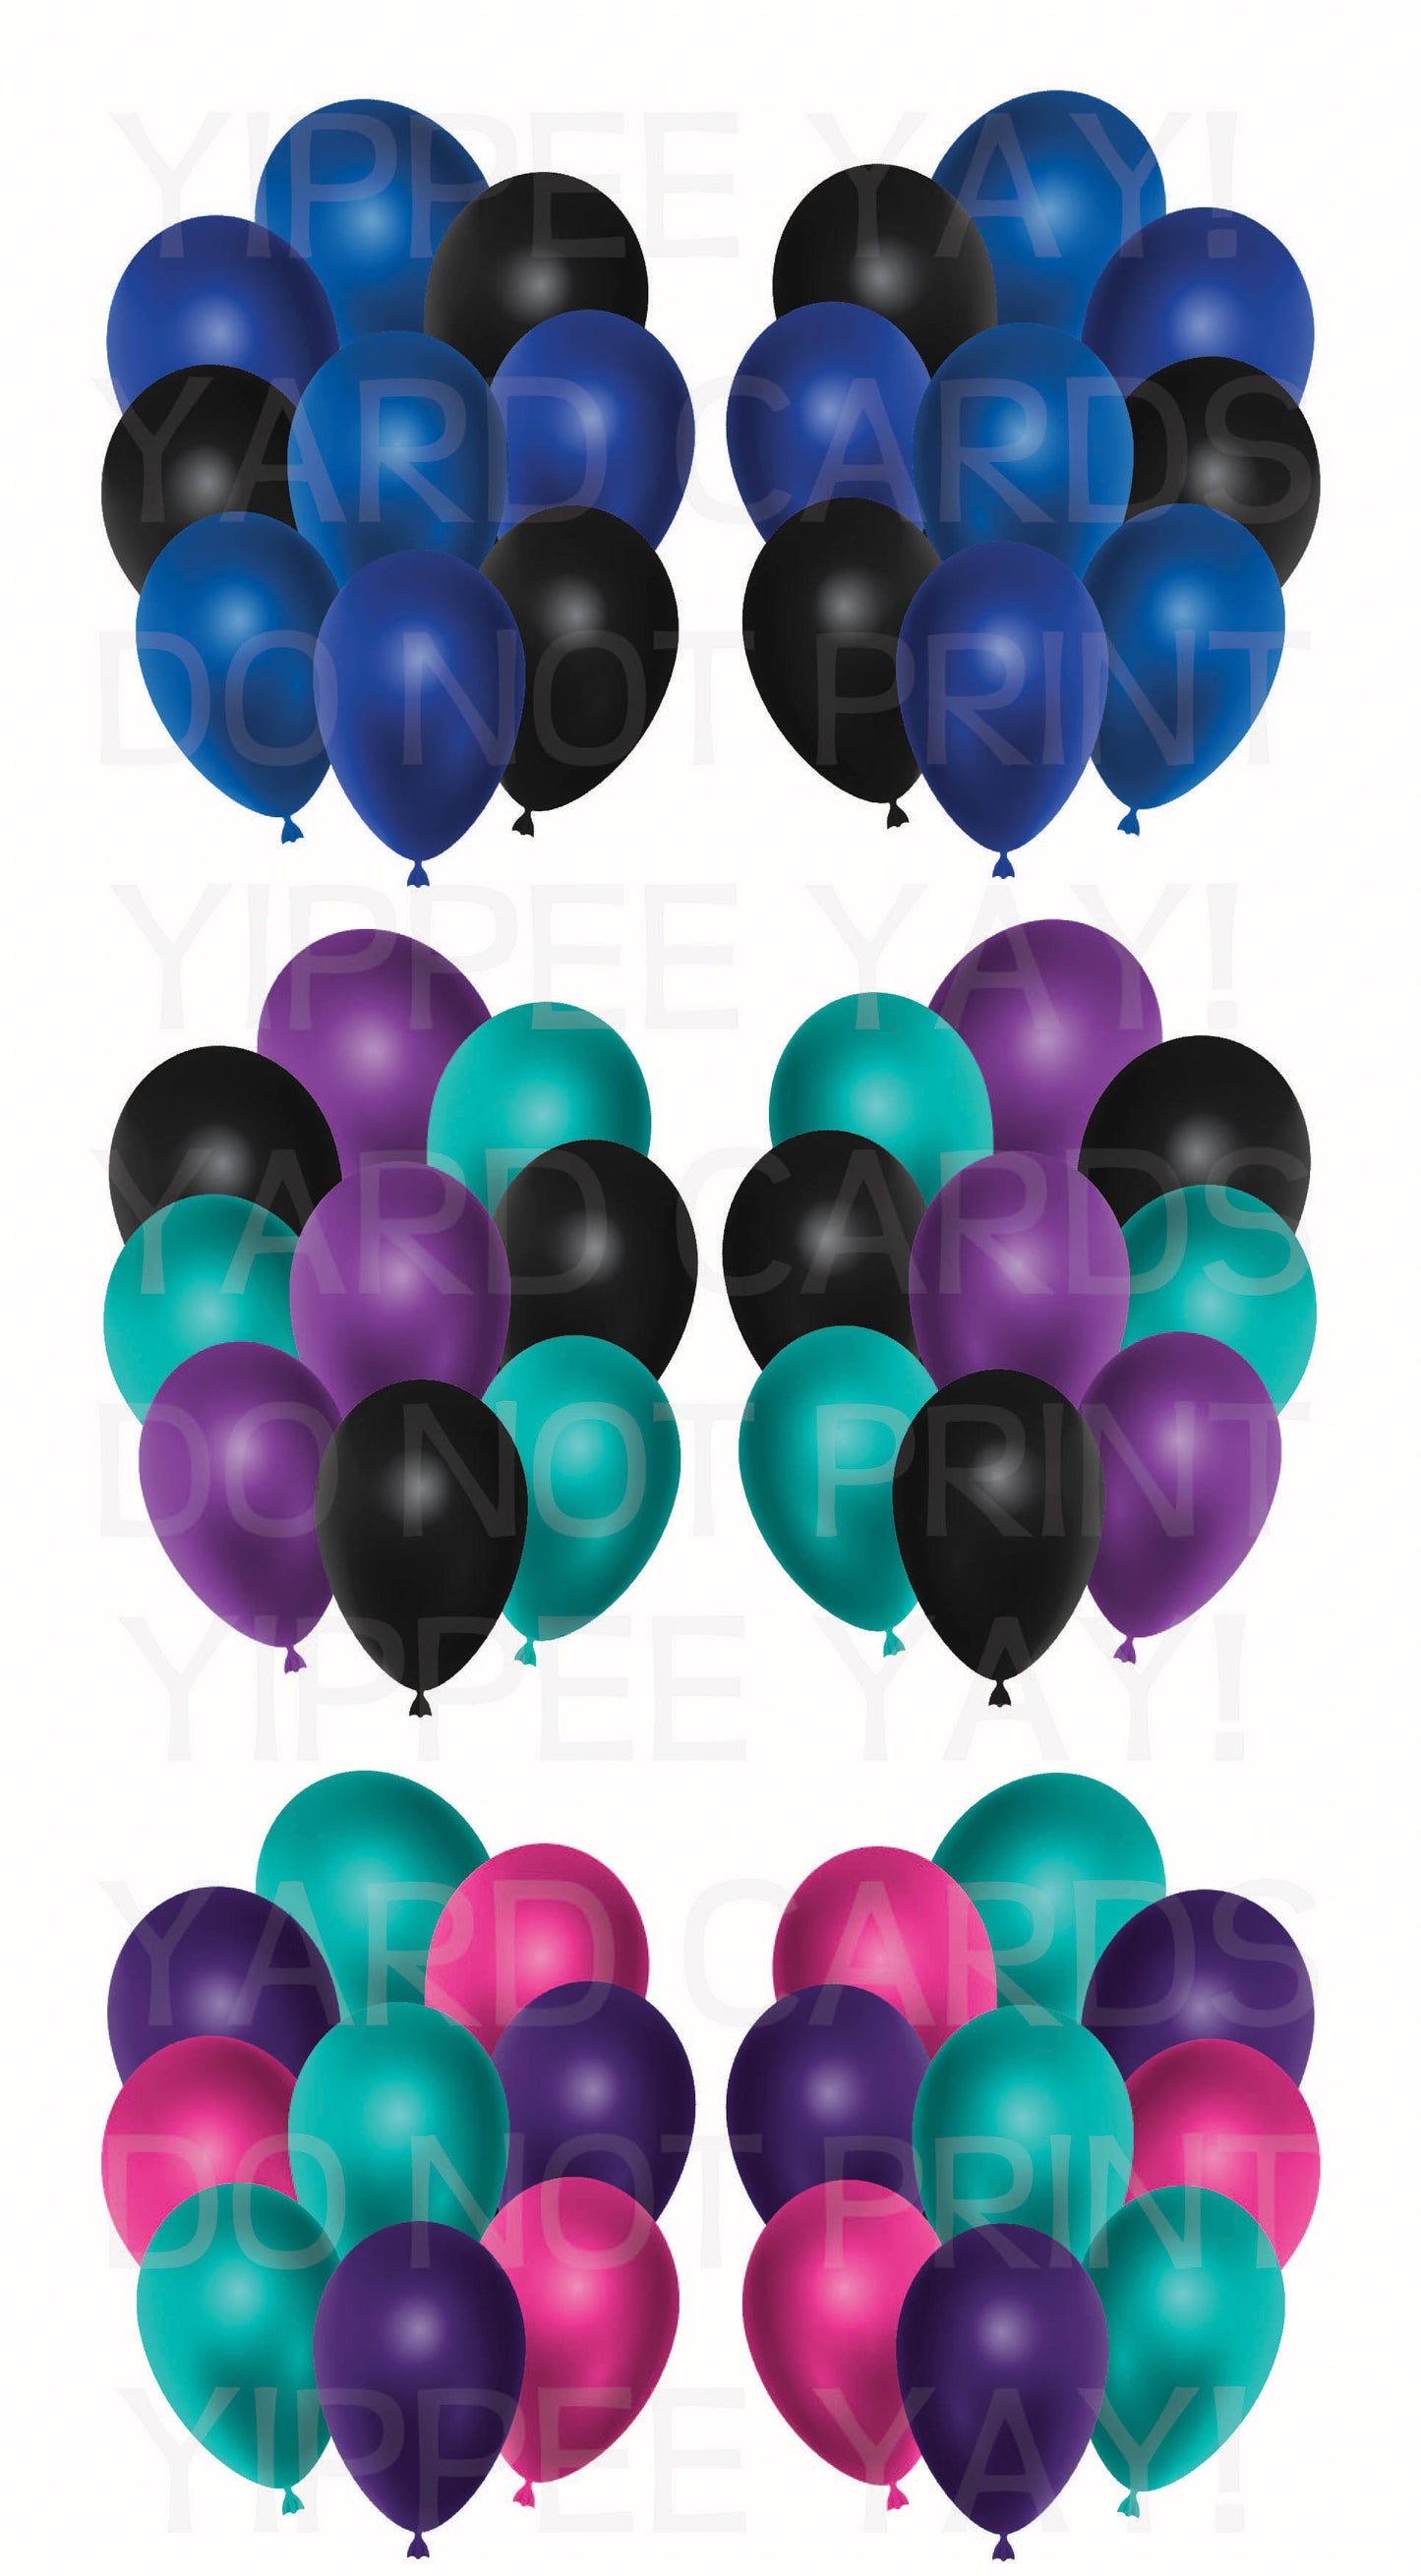 3 Sets of Balloon Bunches 10